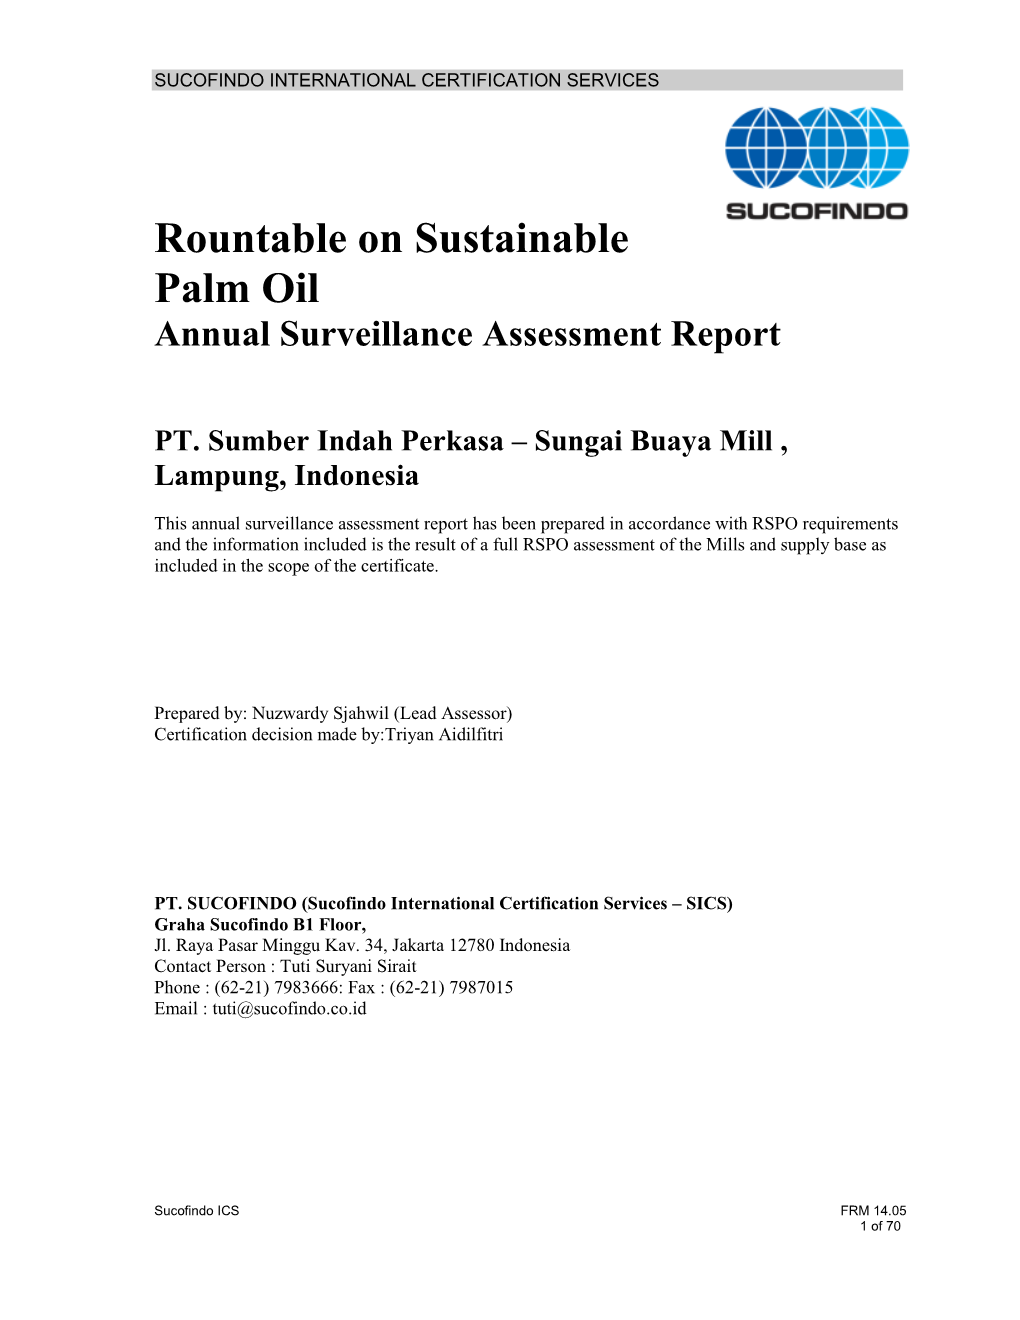 Rountable on Sustainable Palm Oil Annual Surveillance Assessment Report